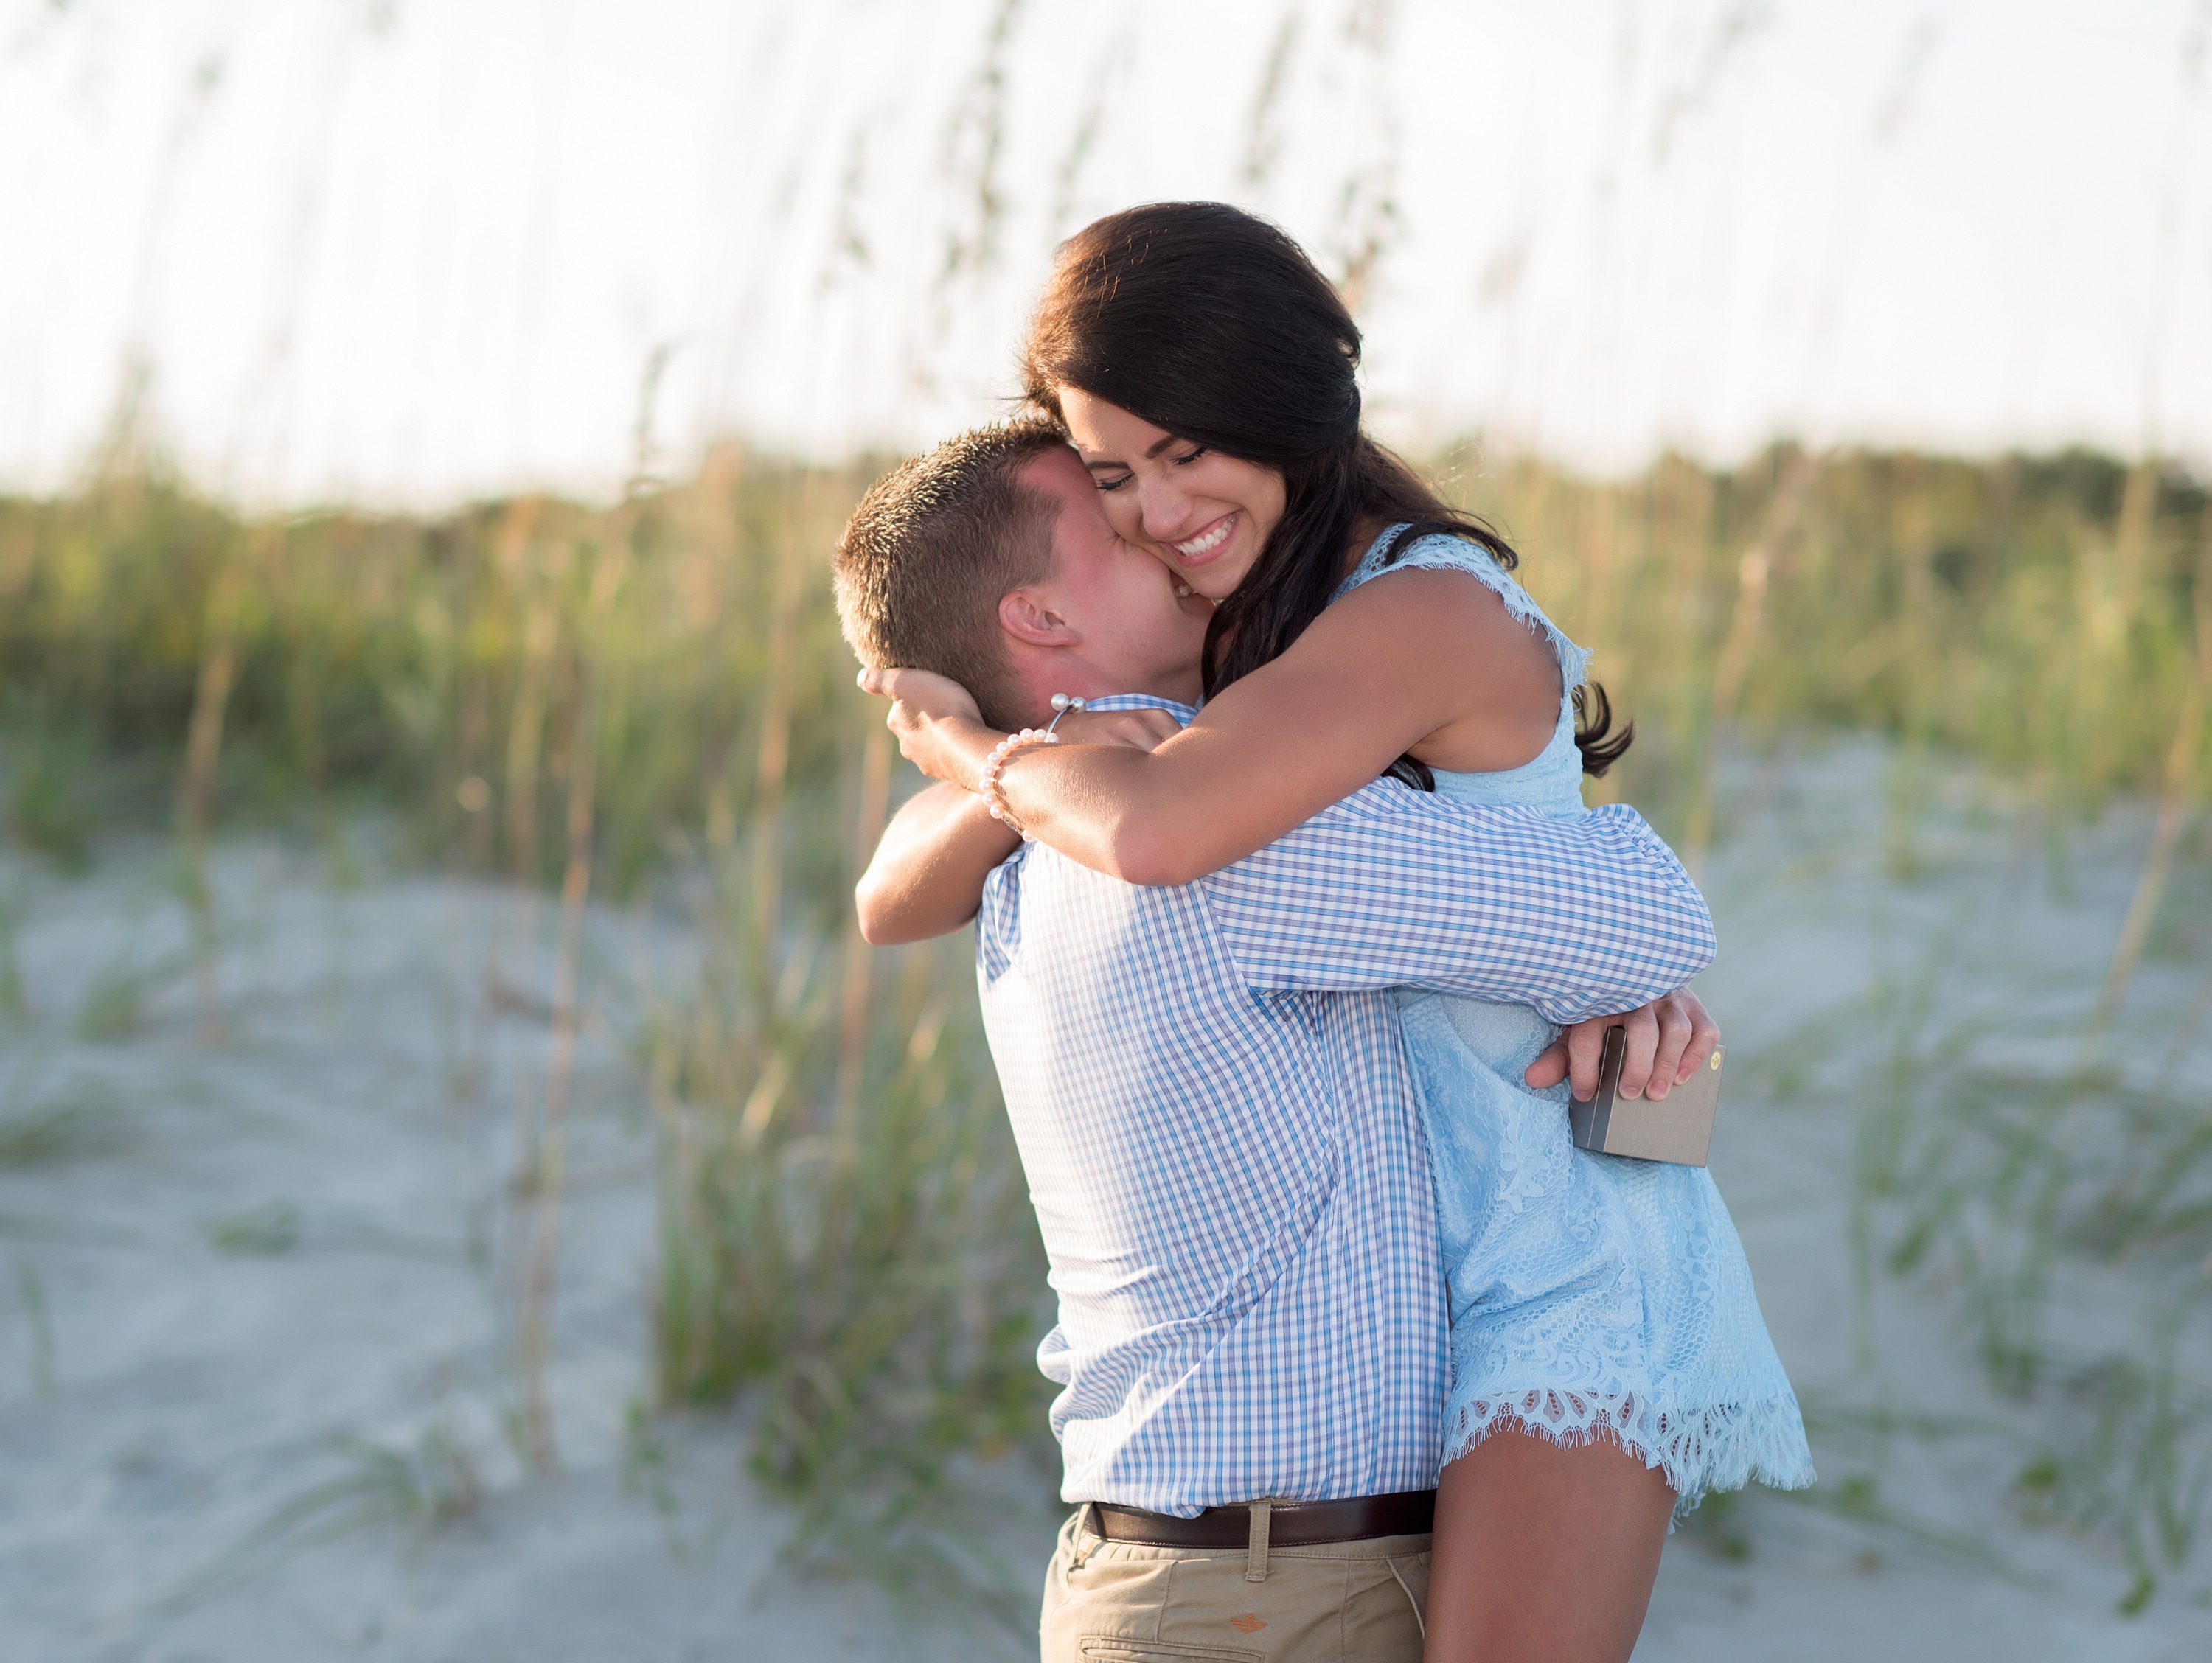 Guy getting a really big hug after surprise proposal - Myrtle Beach State Park